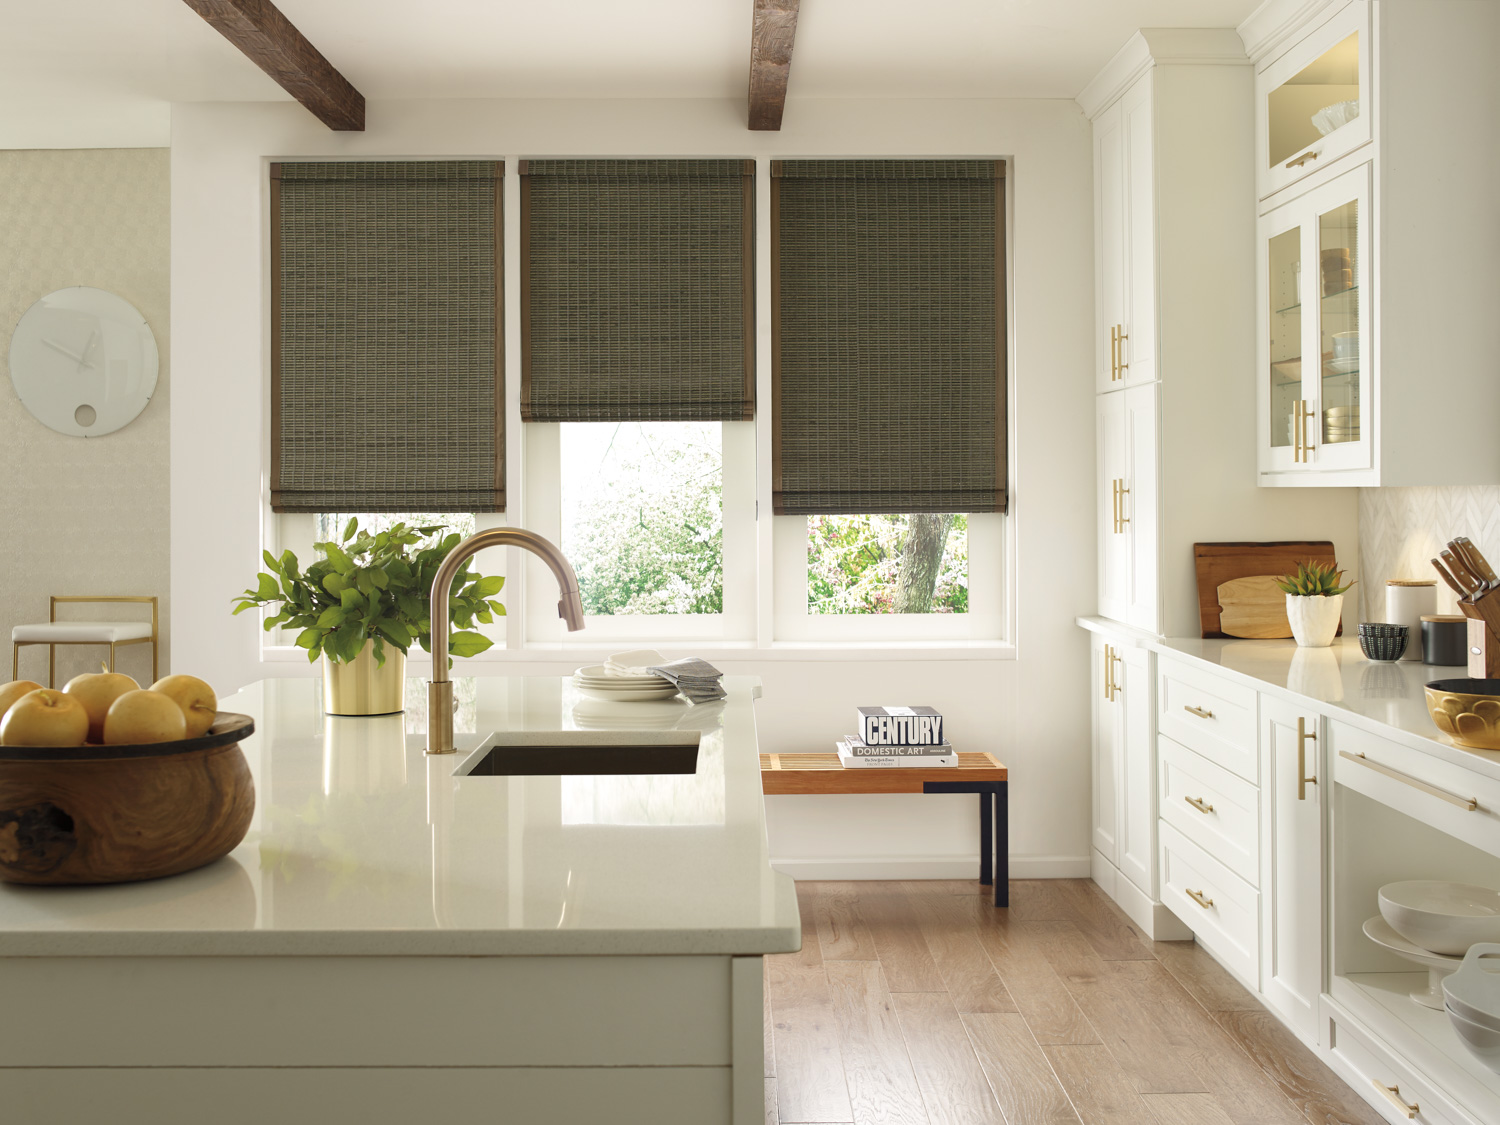 Modern kitchen design with white cabinets, window blinds, and NATURAL WOVEN WOOD ROMAN SHADES.